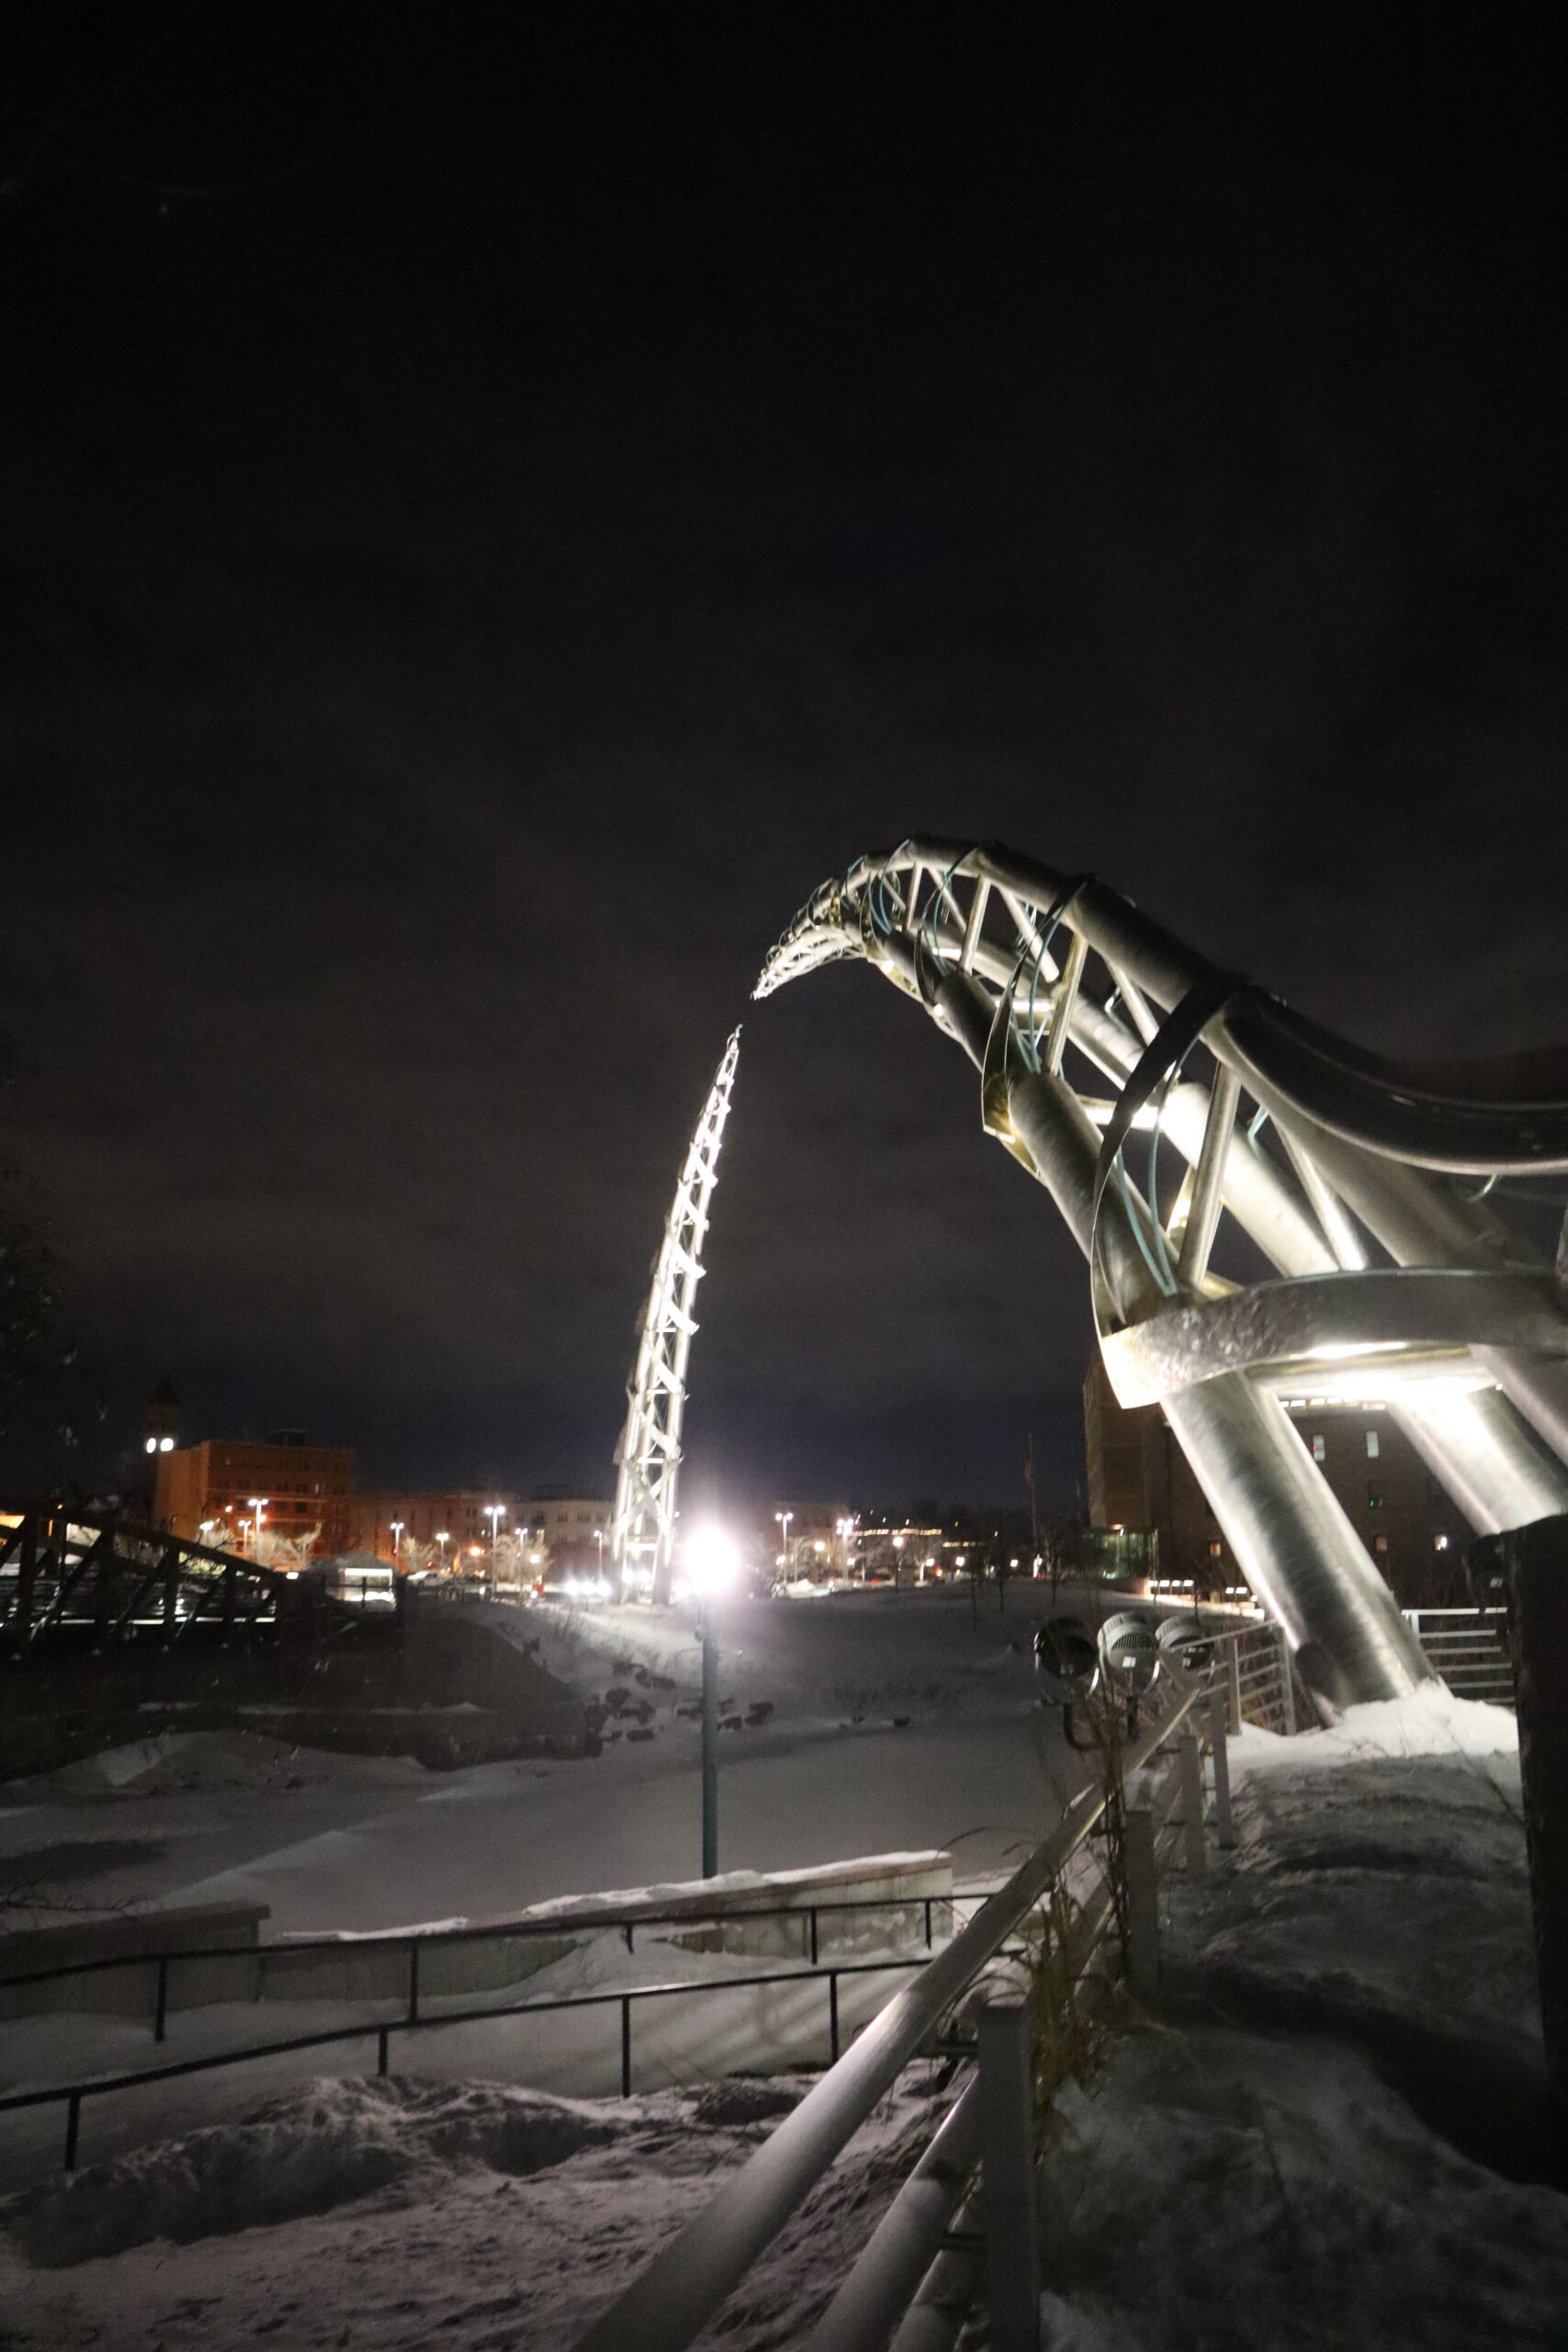 The Arc of Dreams at night, Sioux Falls, SD